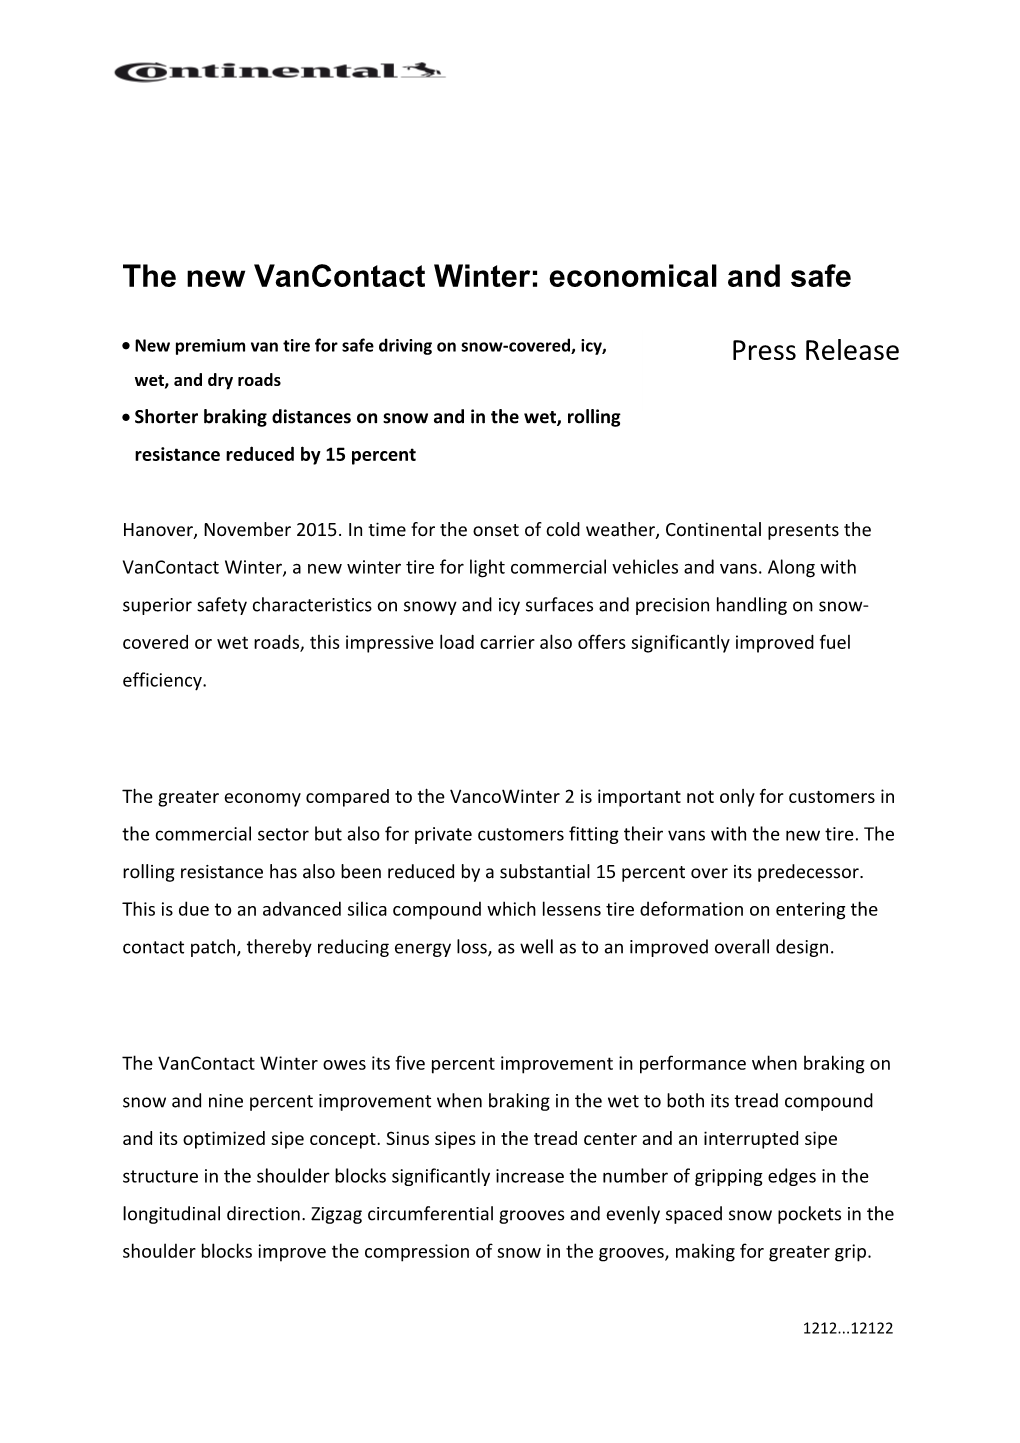 The New Vancontact Winter: Economical and Safe